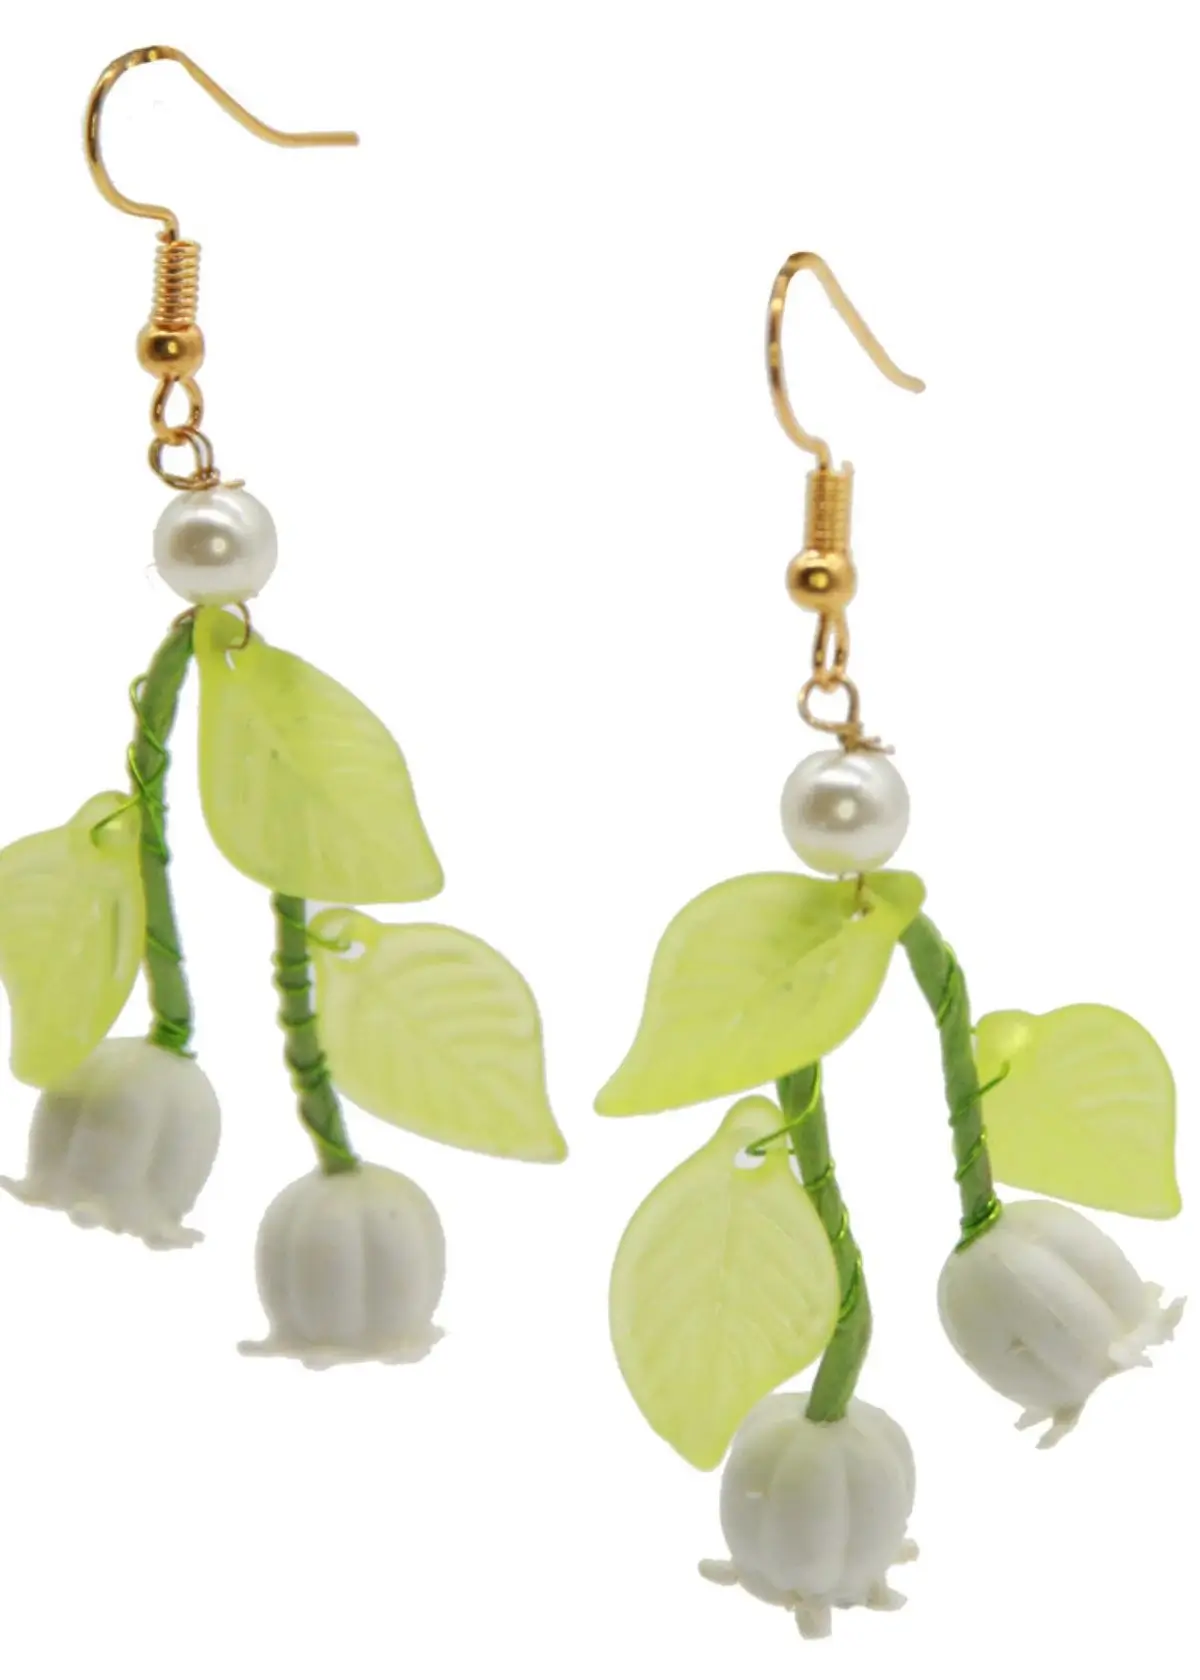 How should I Clean Lily of the Valley Earrings?